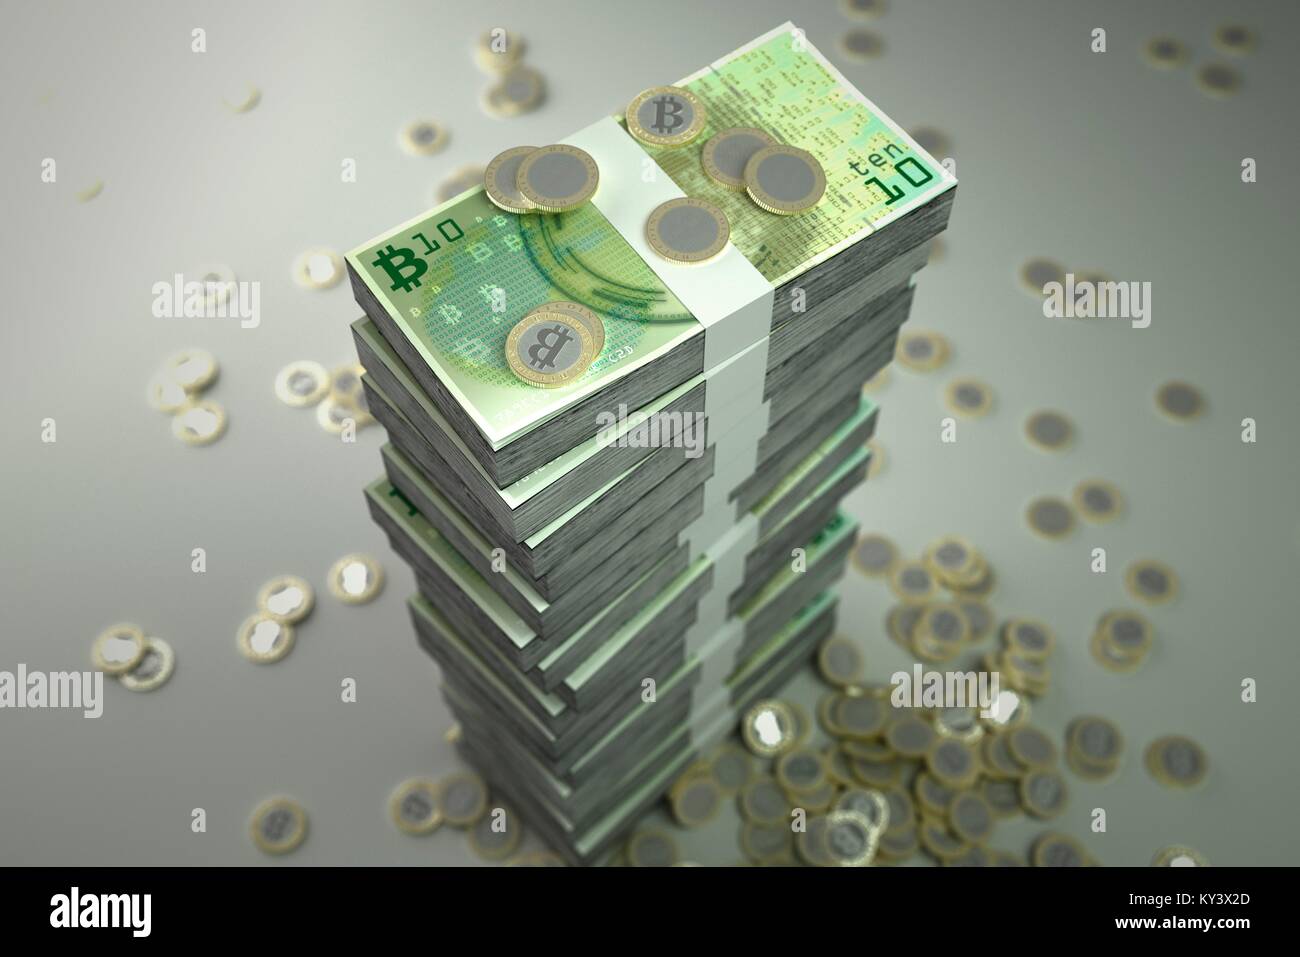 Conceptual illustration representing the bitcoin cryptocurrency as minted coins and printed bills. Bitcoin is a type of digital currency, created in 2009, which operates independently of any bank. Certain vendors now accept Bitcoins as payment of goods or services. Stock Photo